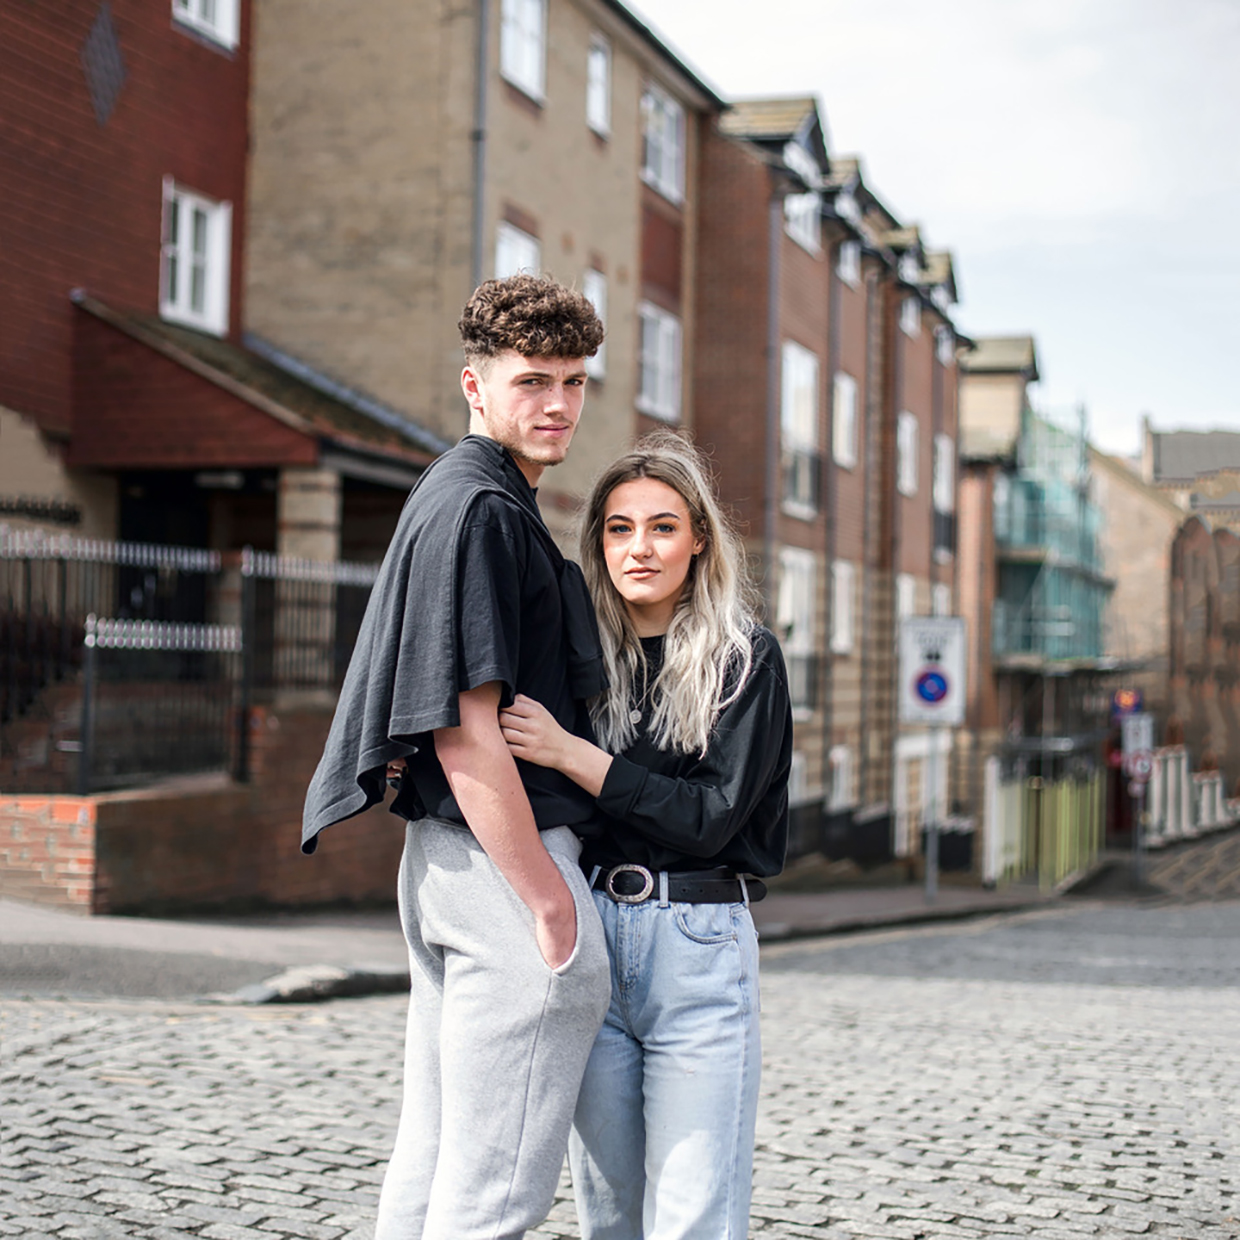 Lee Brodhurst-Cooper photographed this young couple in Folkestone, on England's south coast.